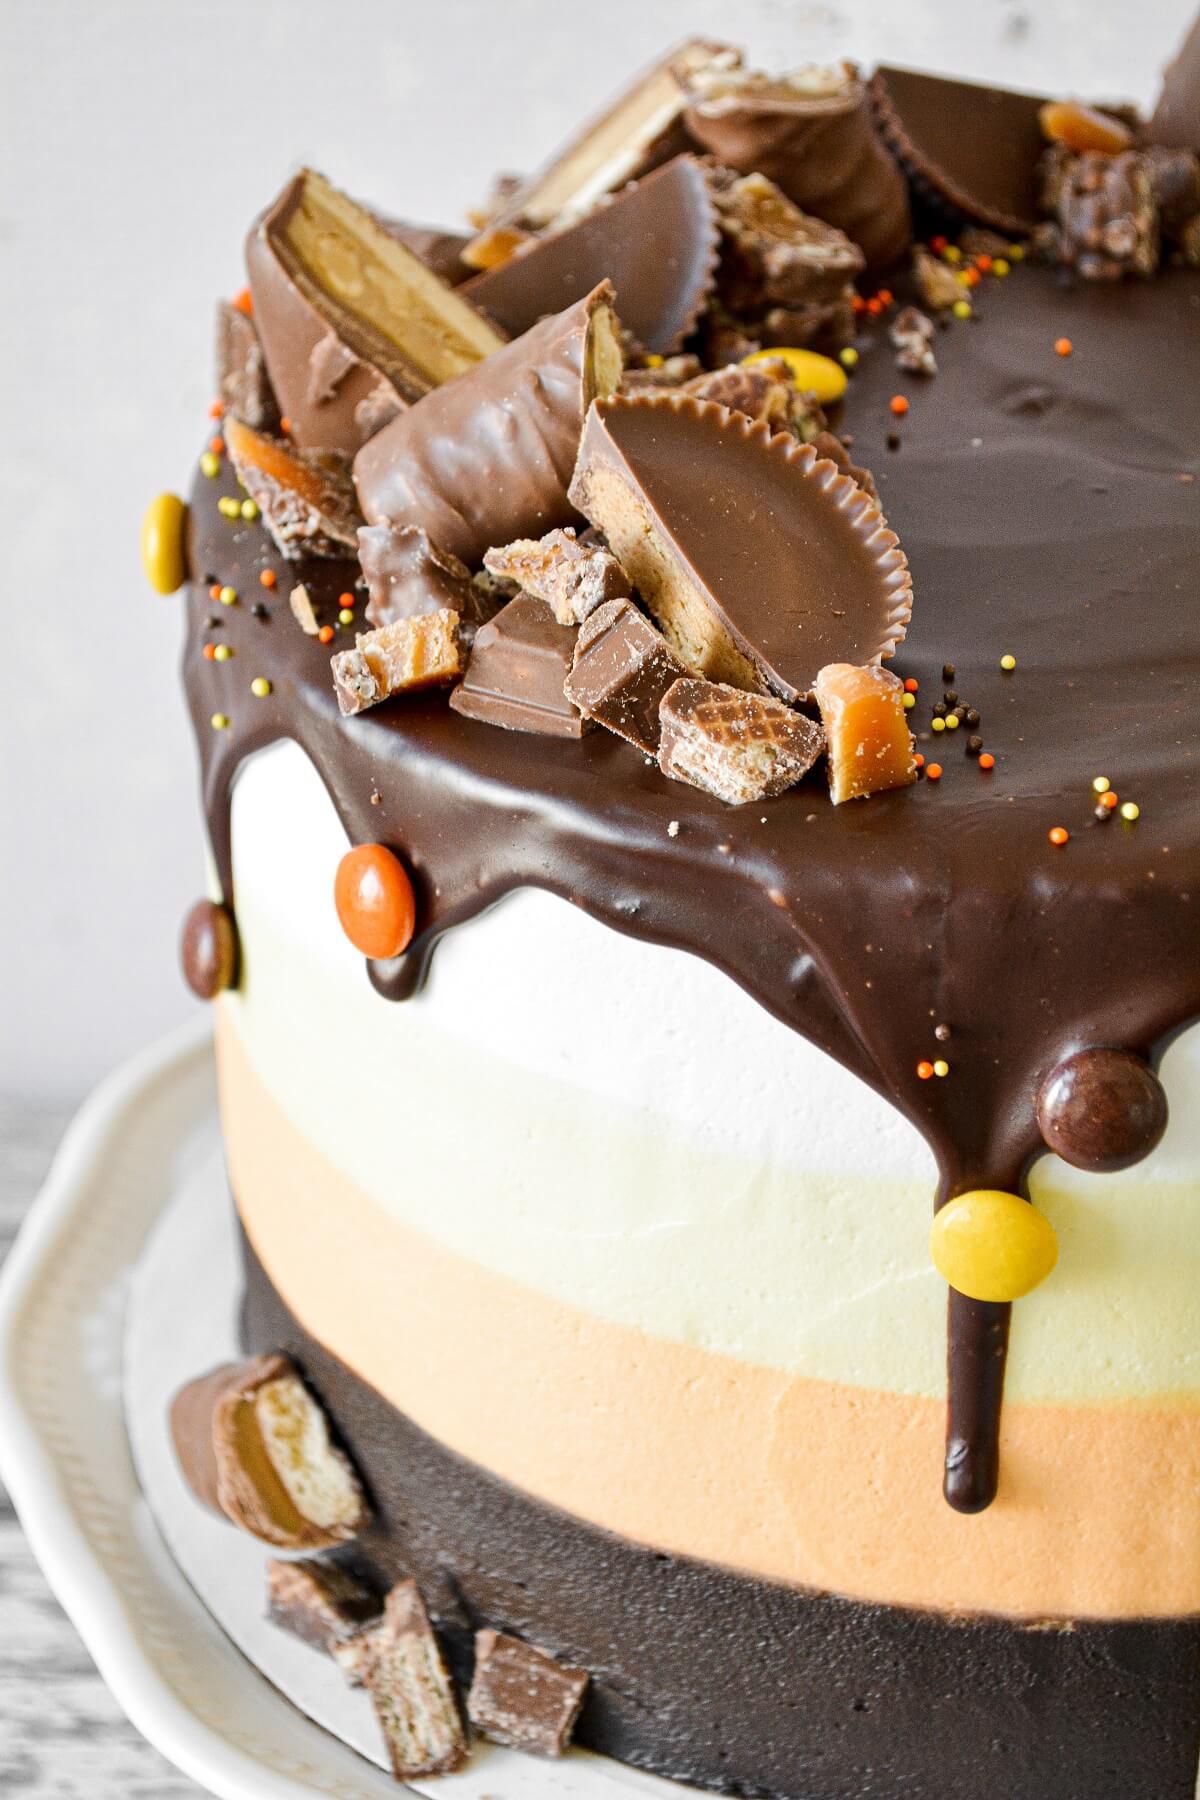 Halloween cake with striped layers of cake and buttercream in candy corn colors, decorated with candy.